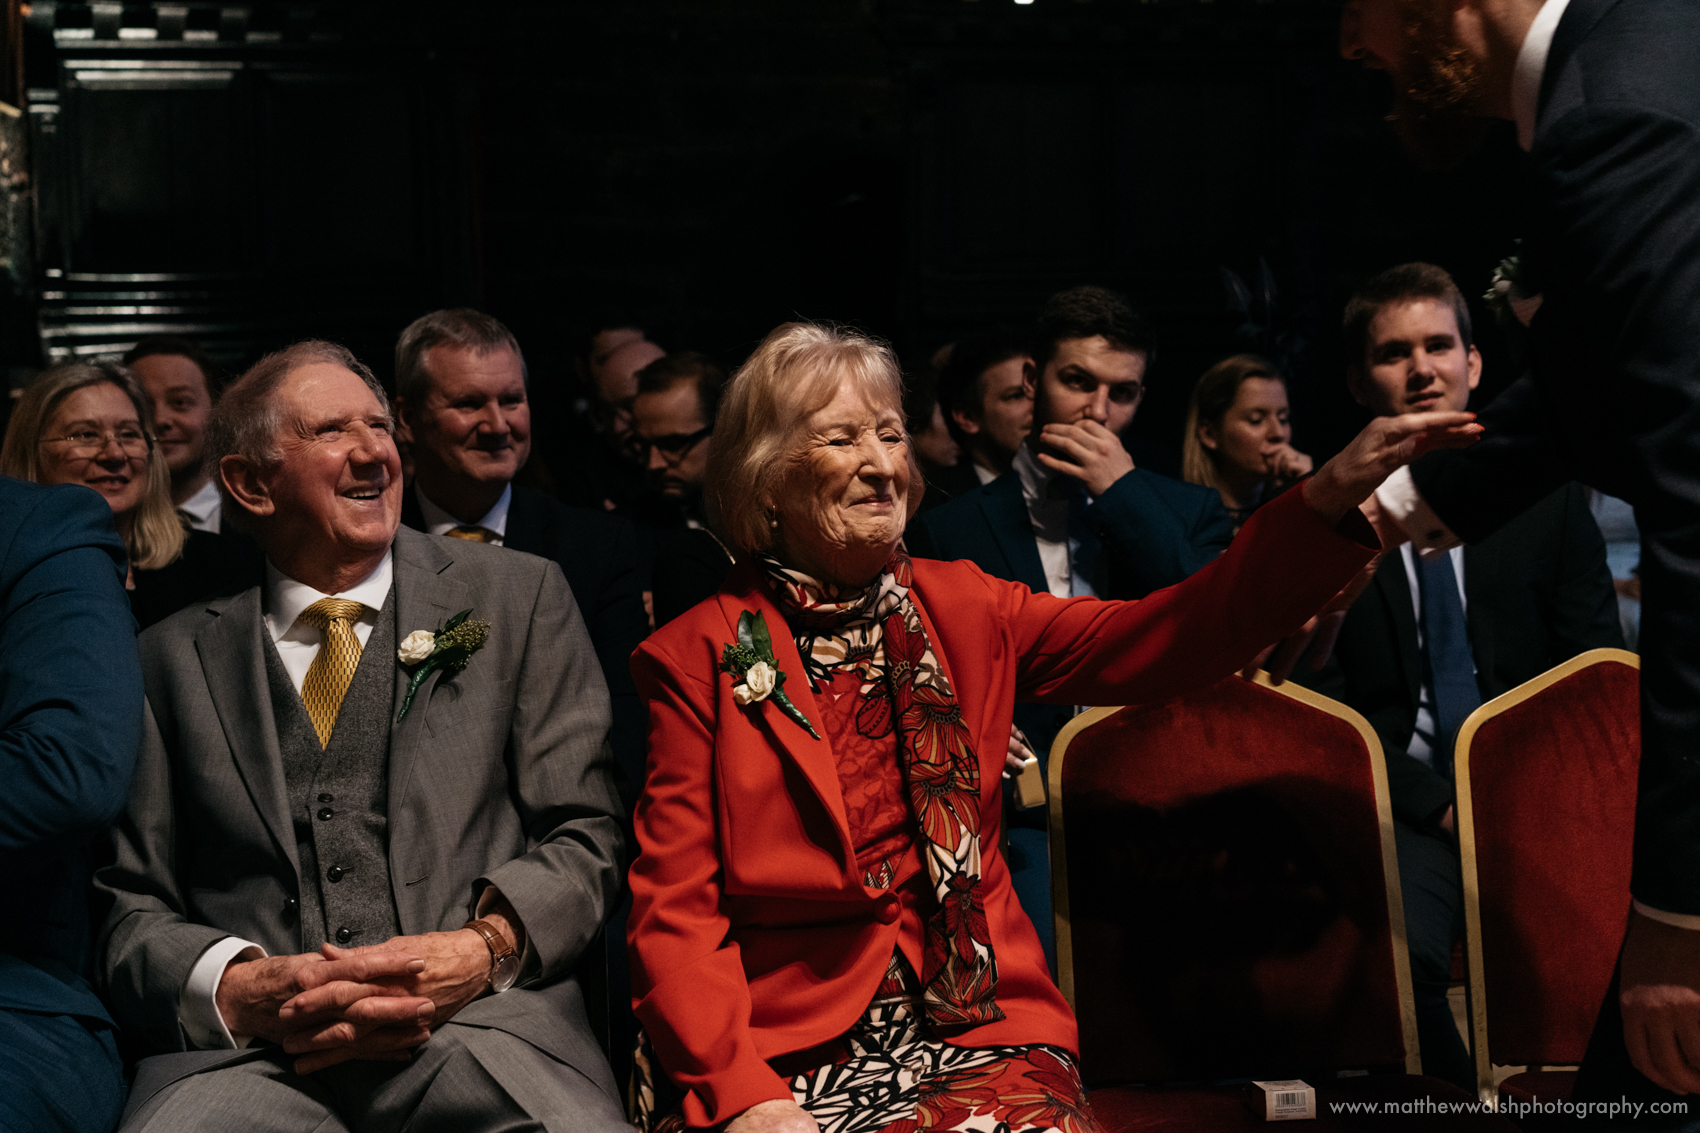 Proud grandparents get front row seats at he ceremony